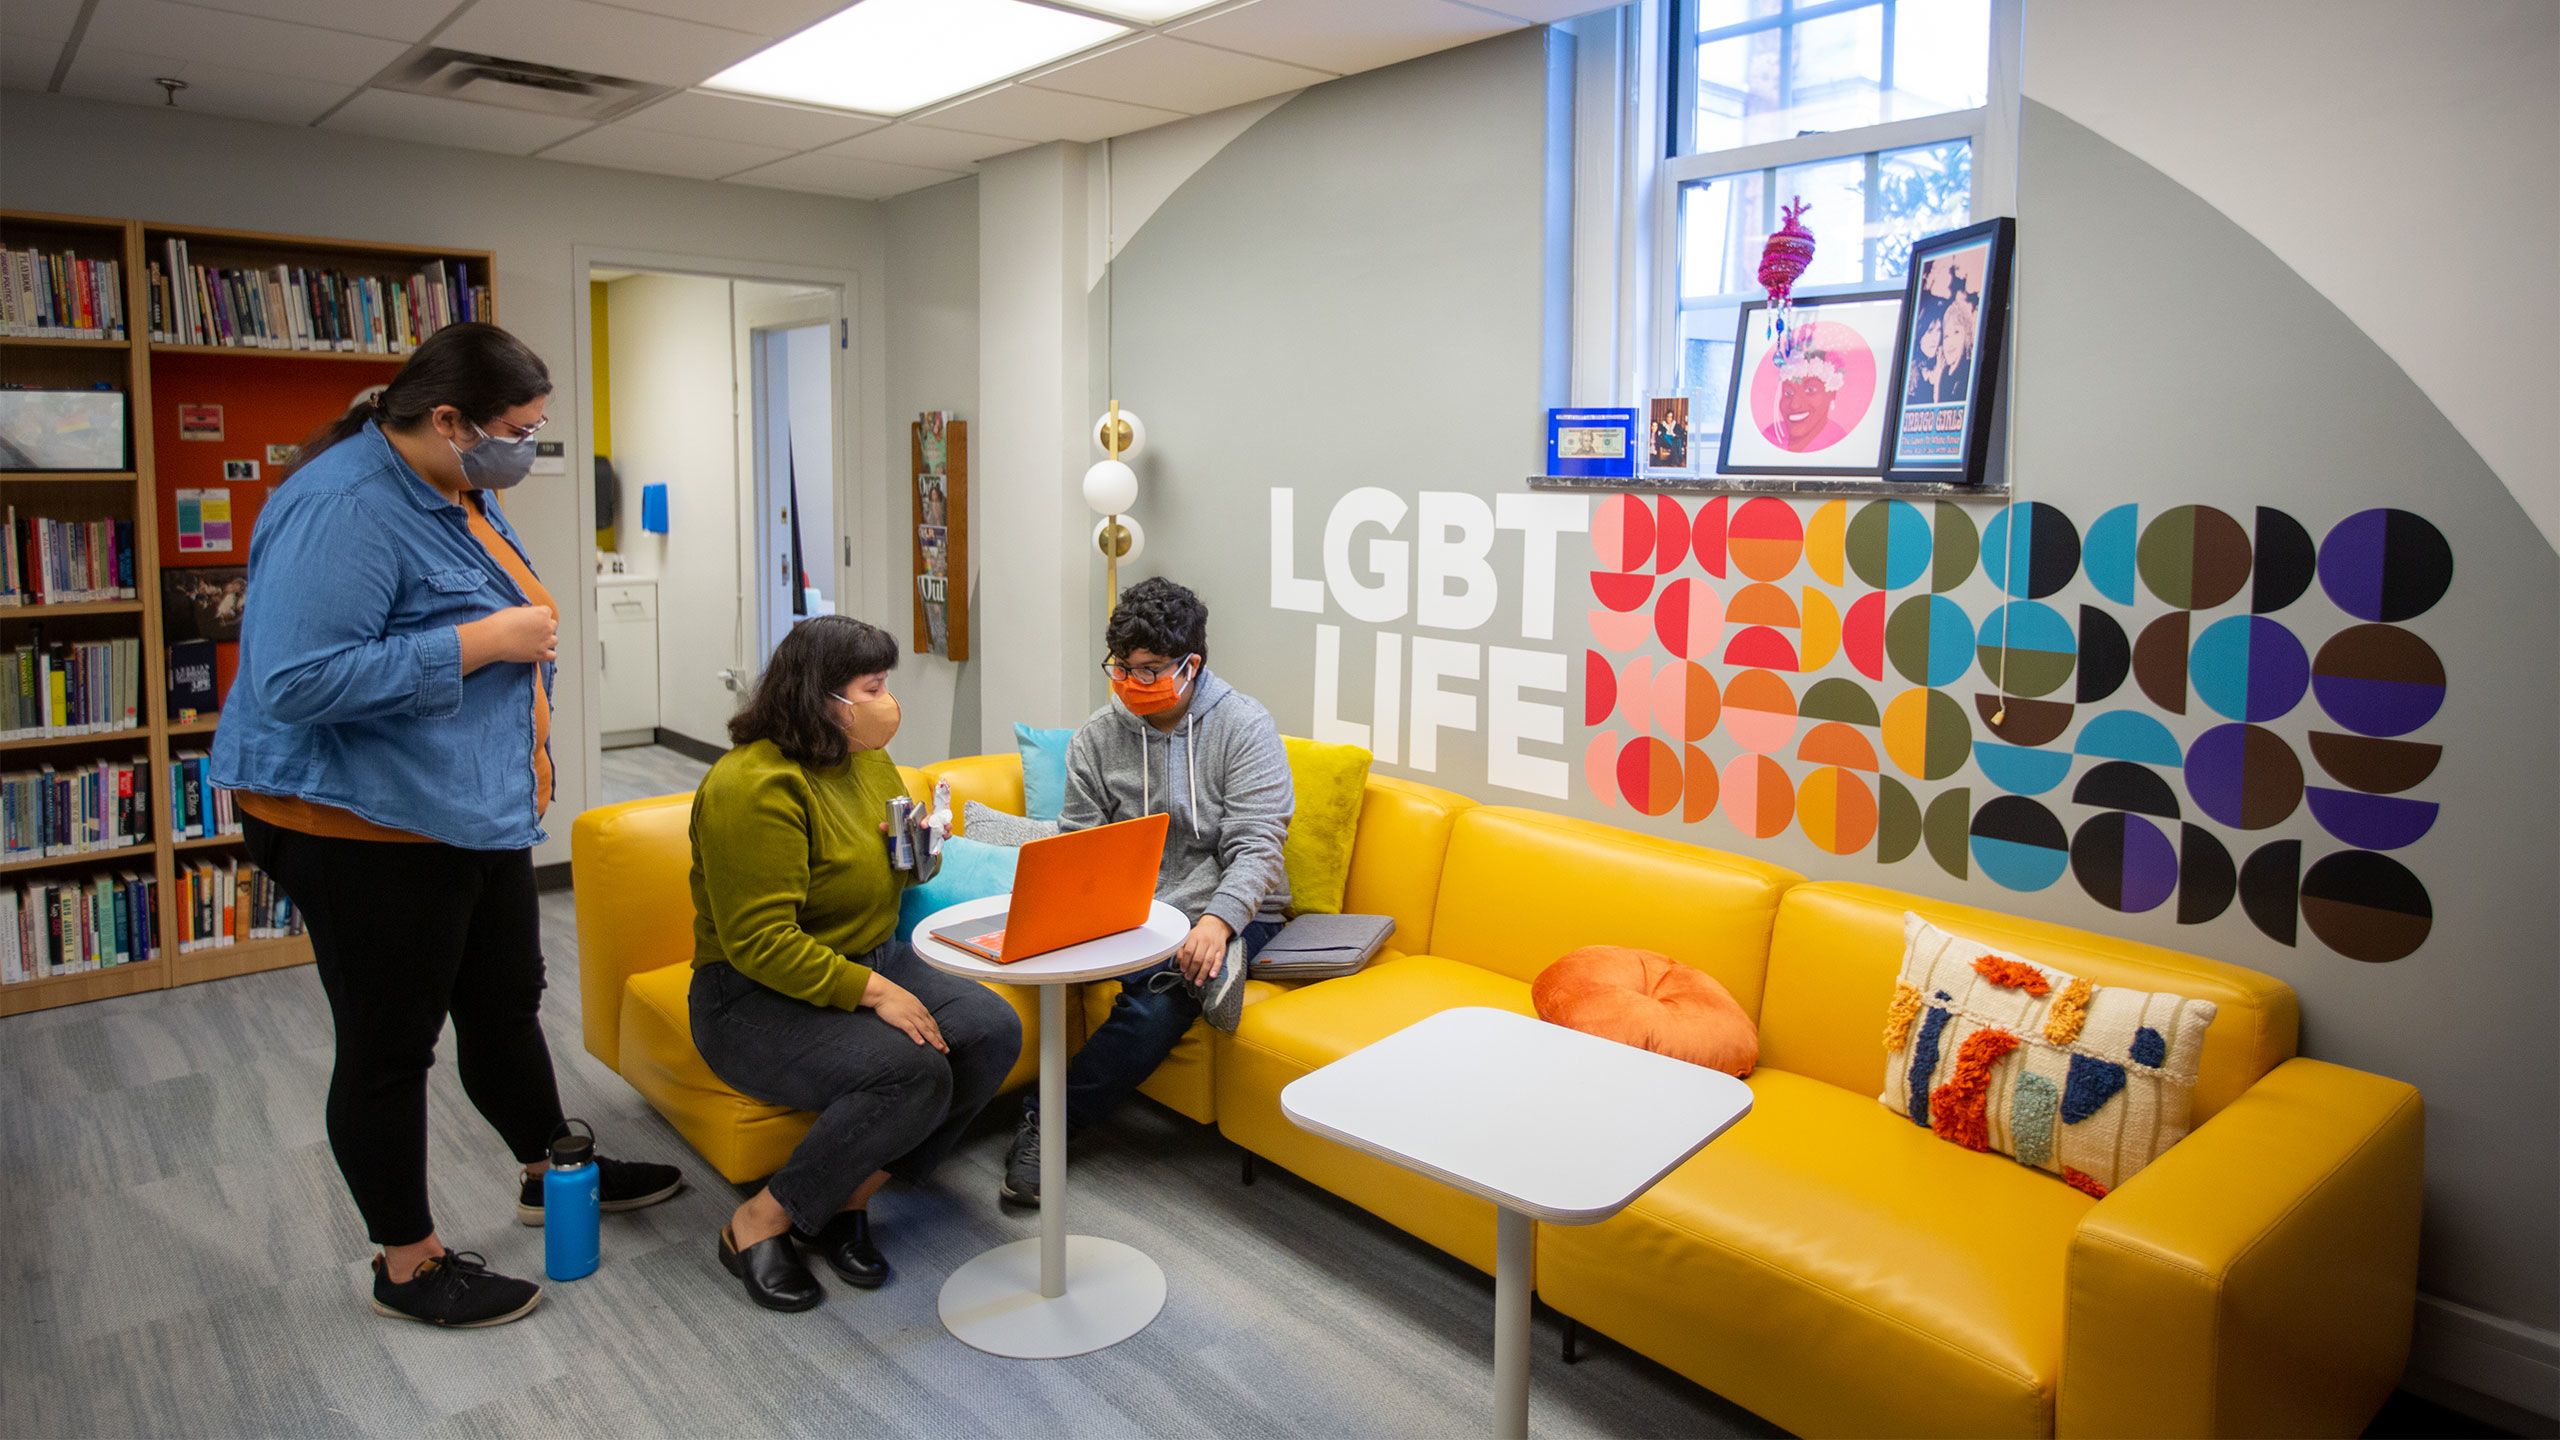 LGBT Life Space